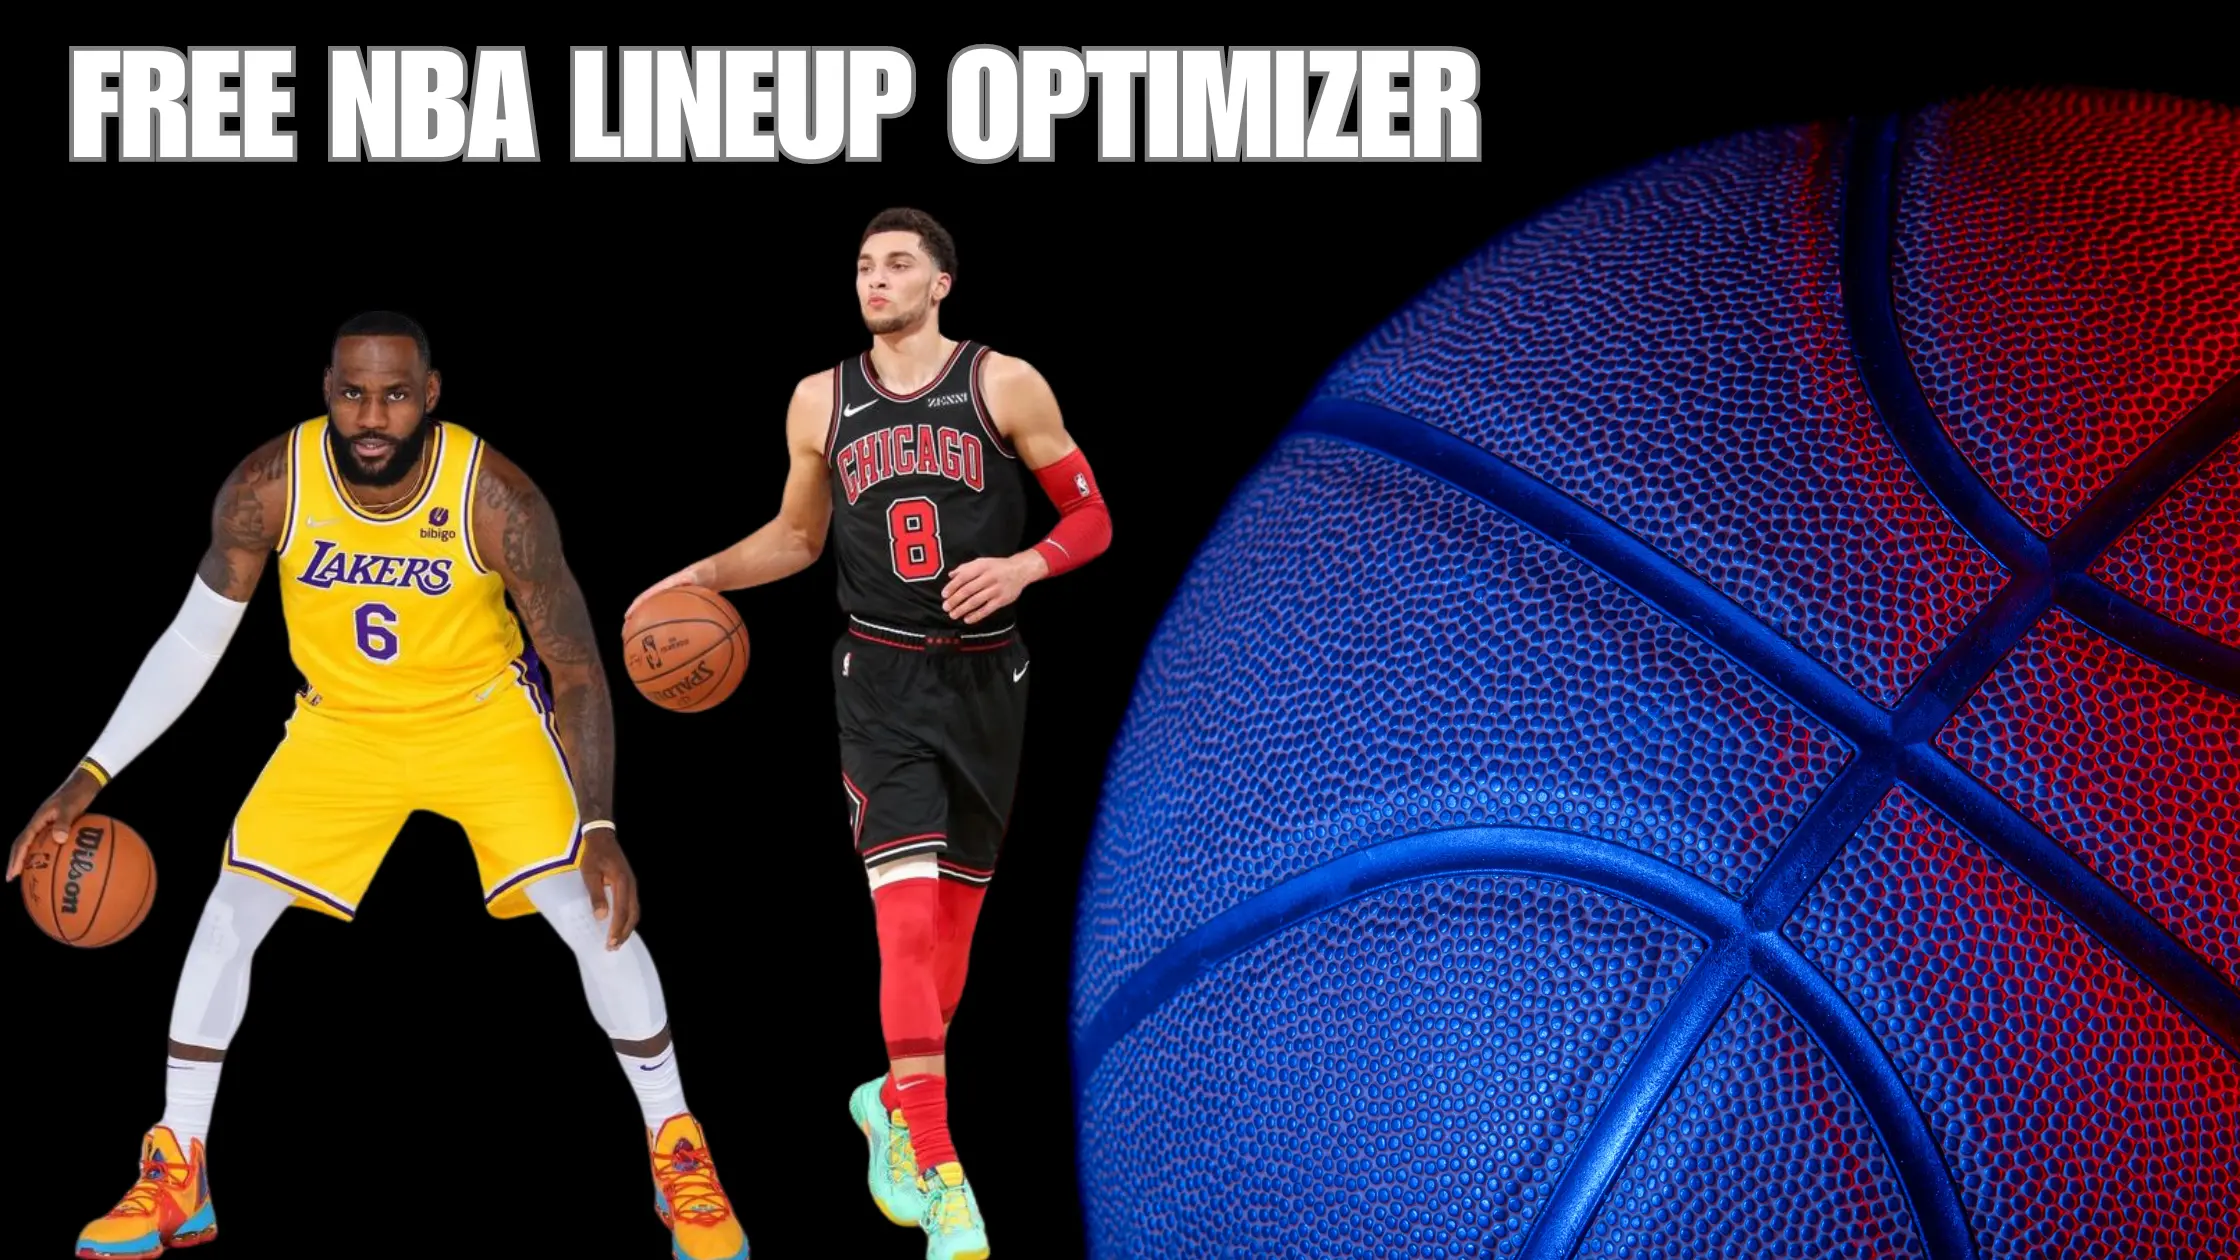 Get loose with Your Fantasy Basketball Potential with the Free NBA Lineup Optimizer.